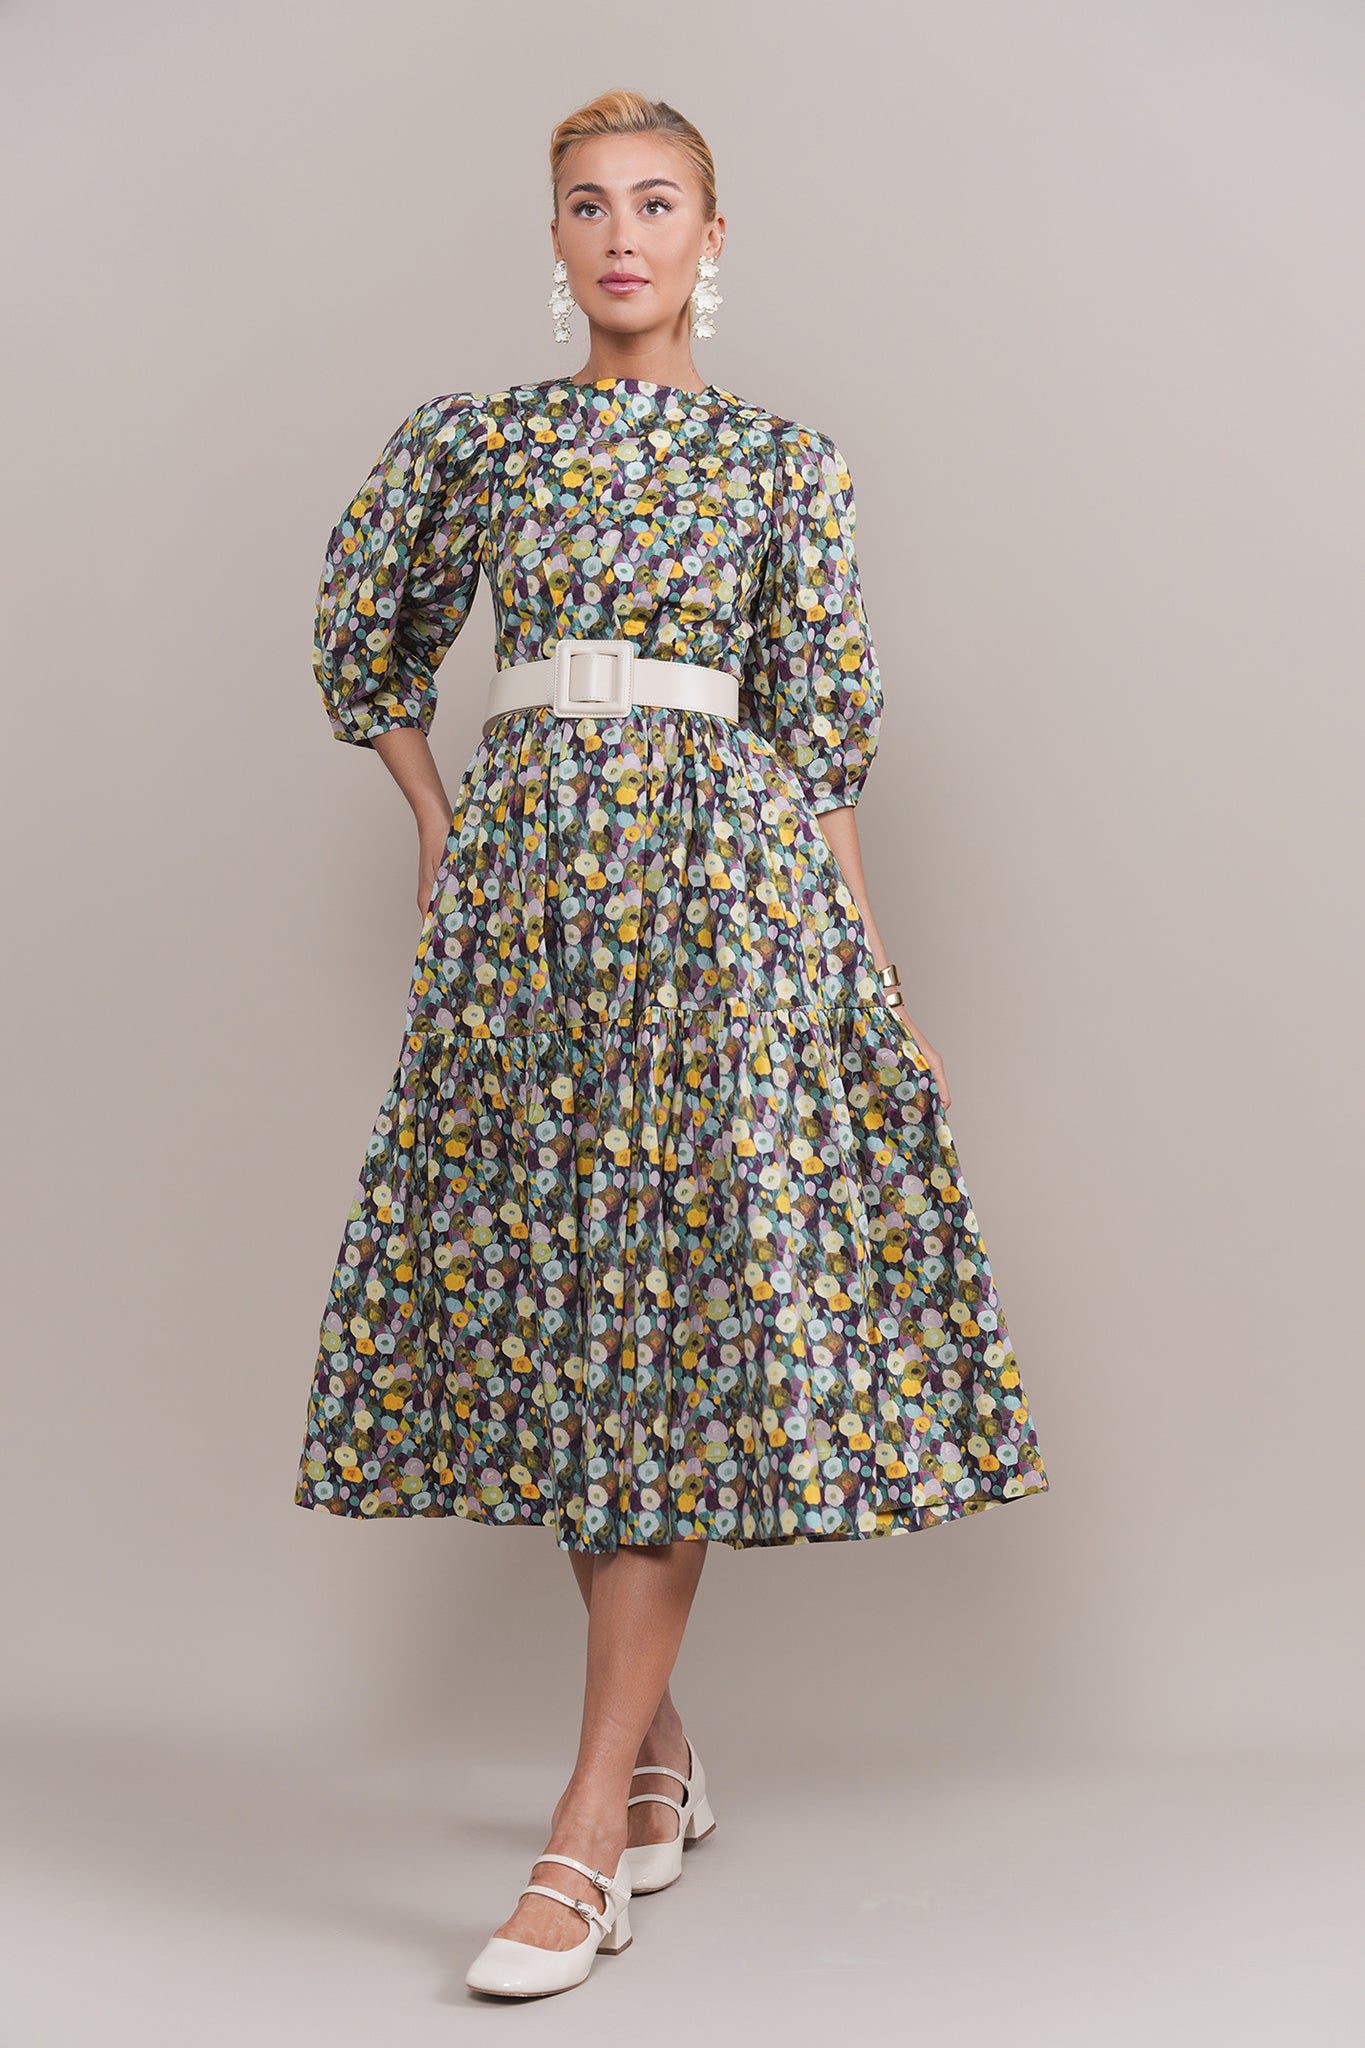 Ellie Convertible Dress in Yellow Mix Floral